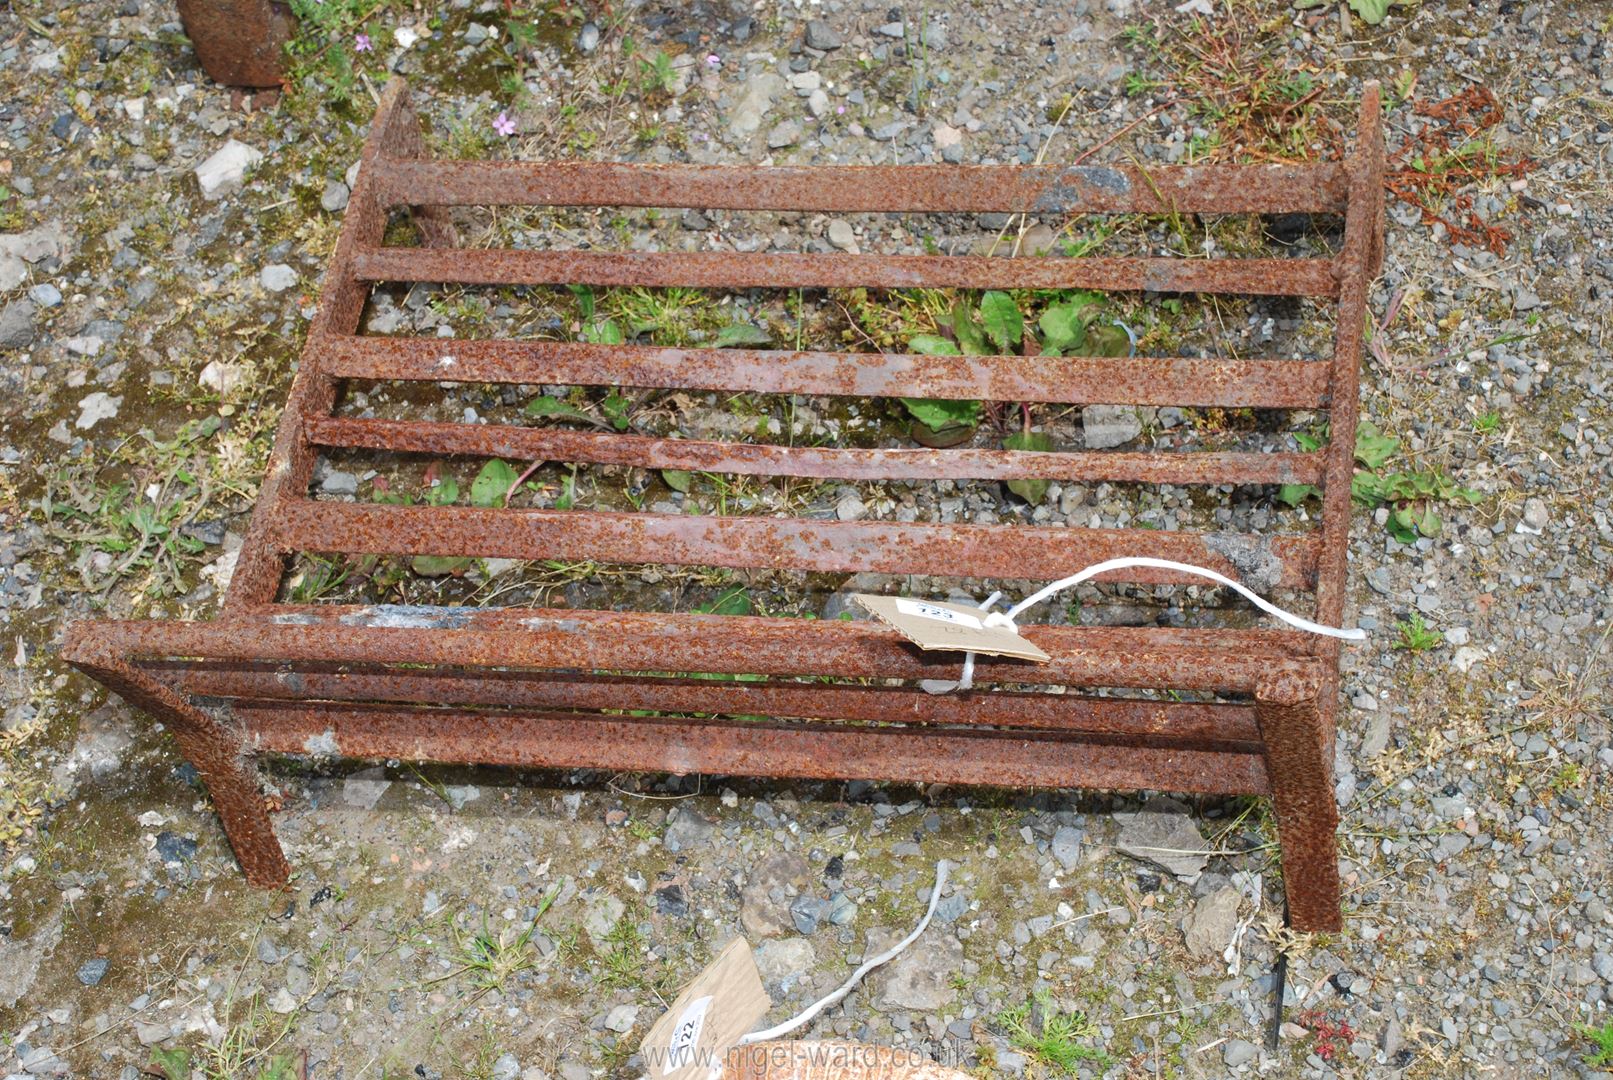 A large metal fire grate.